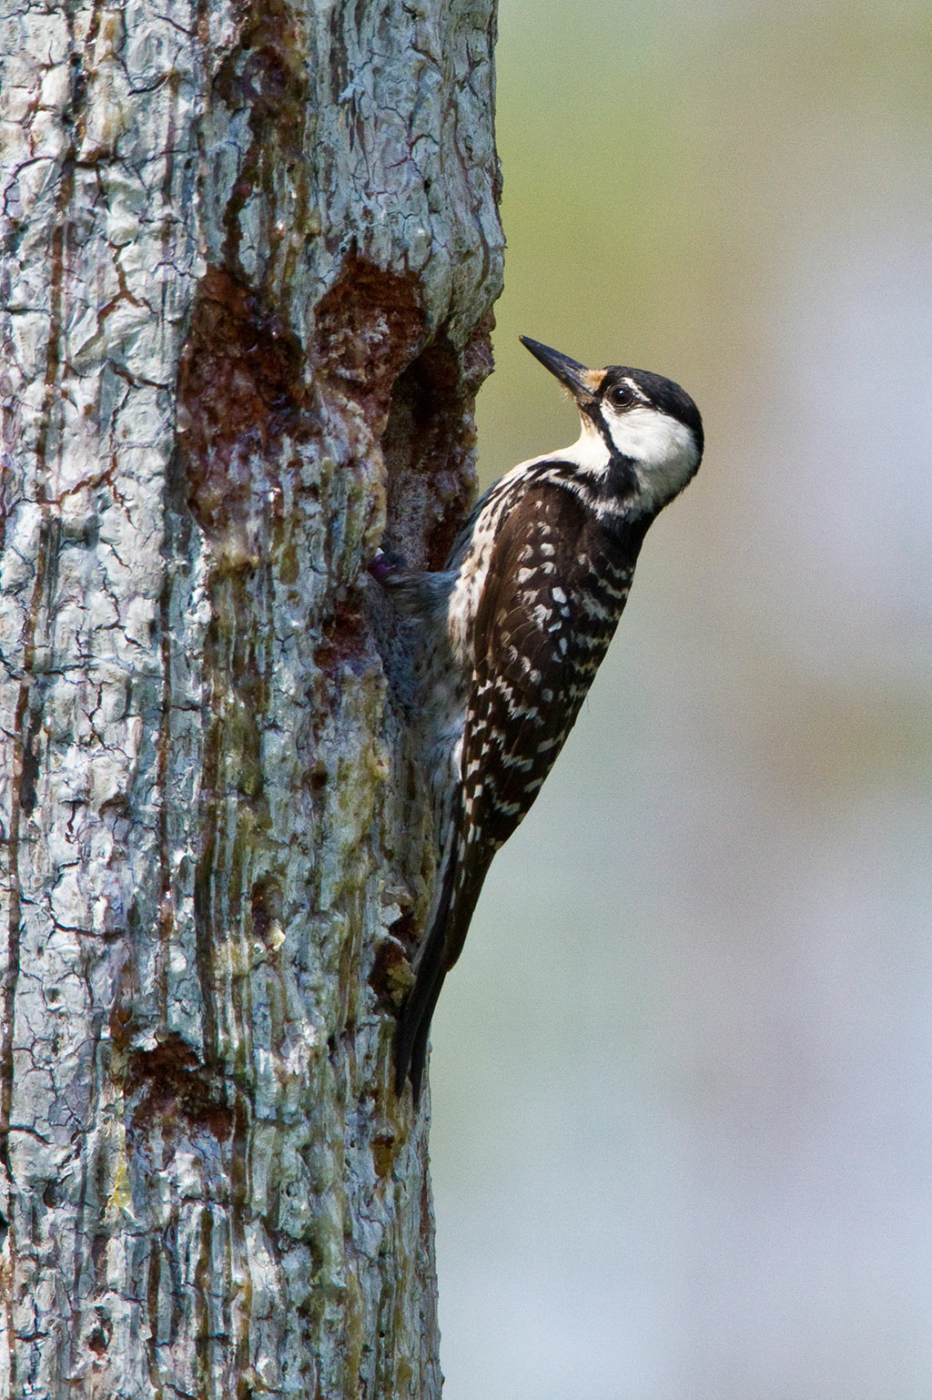 Image of the Panhandle Front red cockaded woodpecker by David Moynahan.